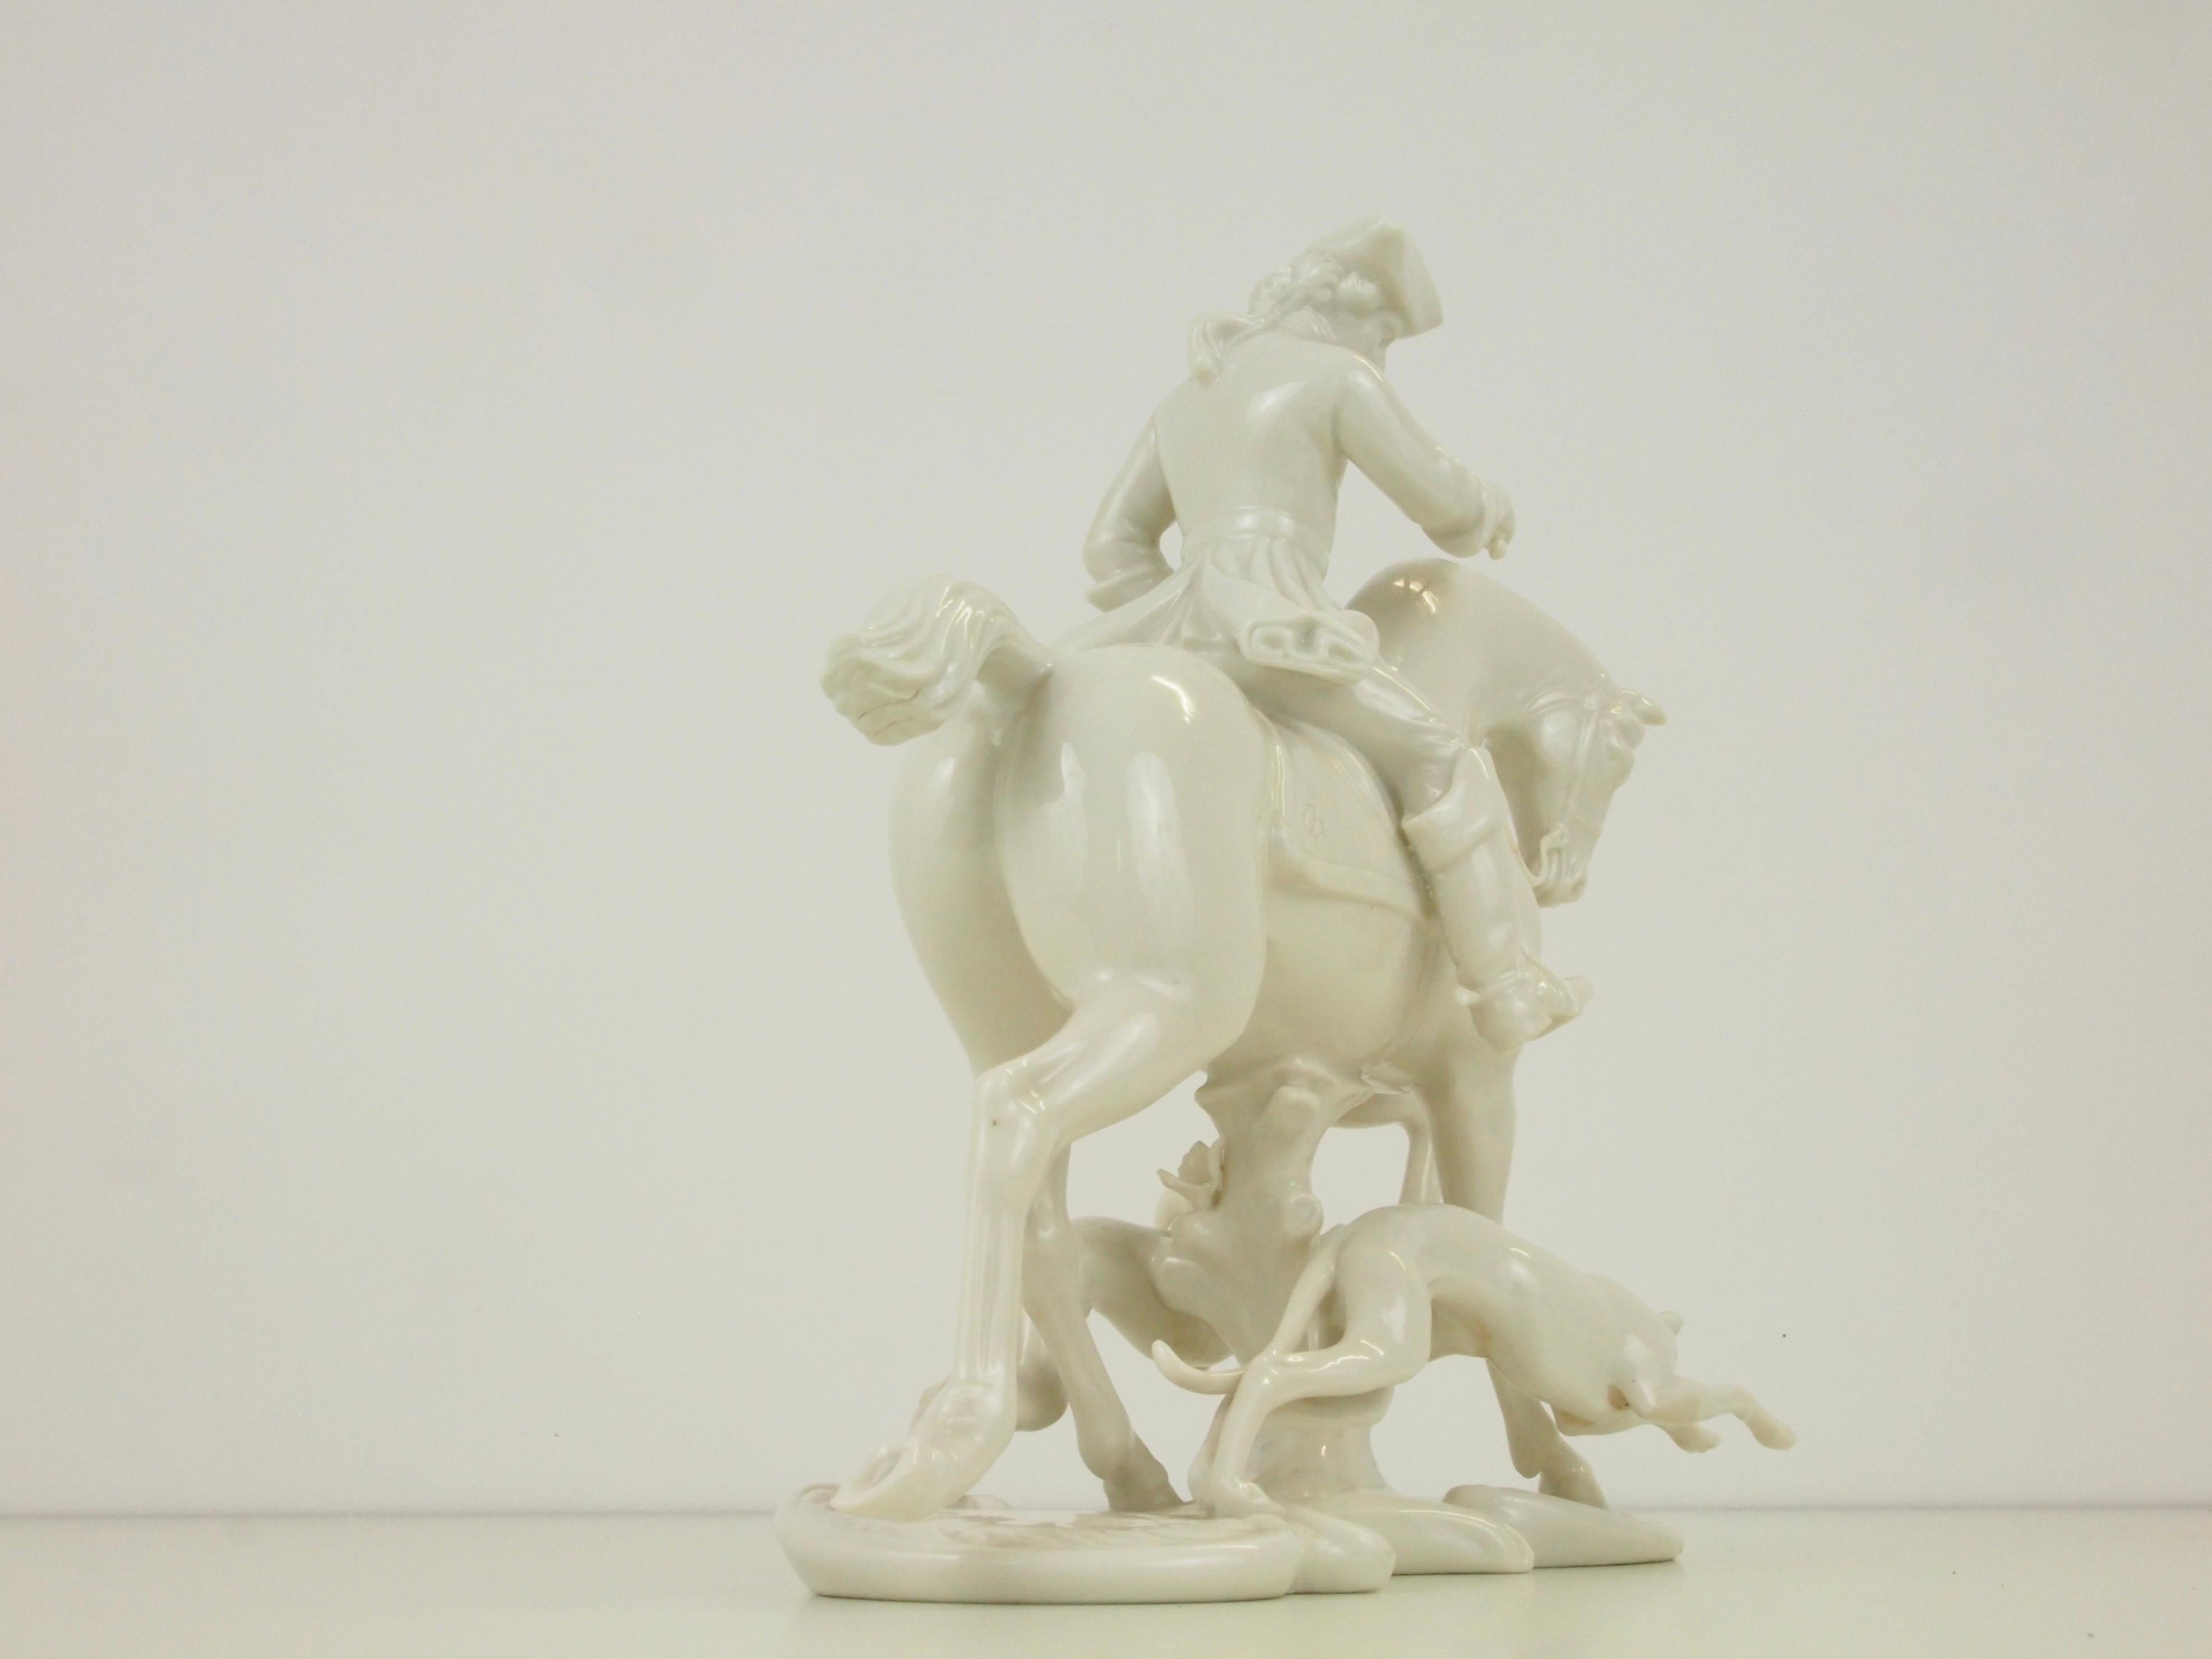 Nymphenburg Porcelain Figurine Depicting a Horse Rider in a Hunting Scene For Sale 5